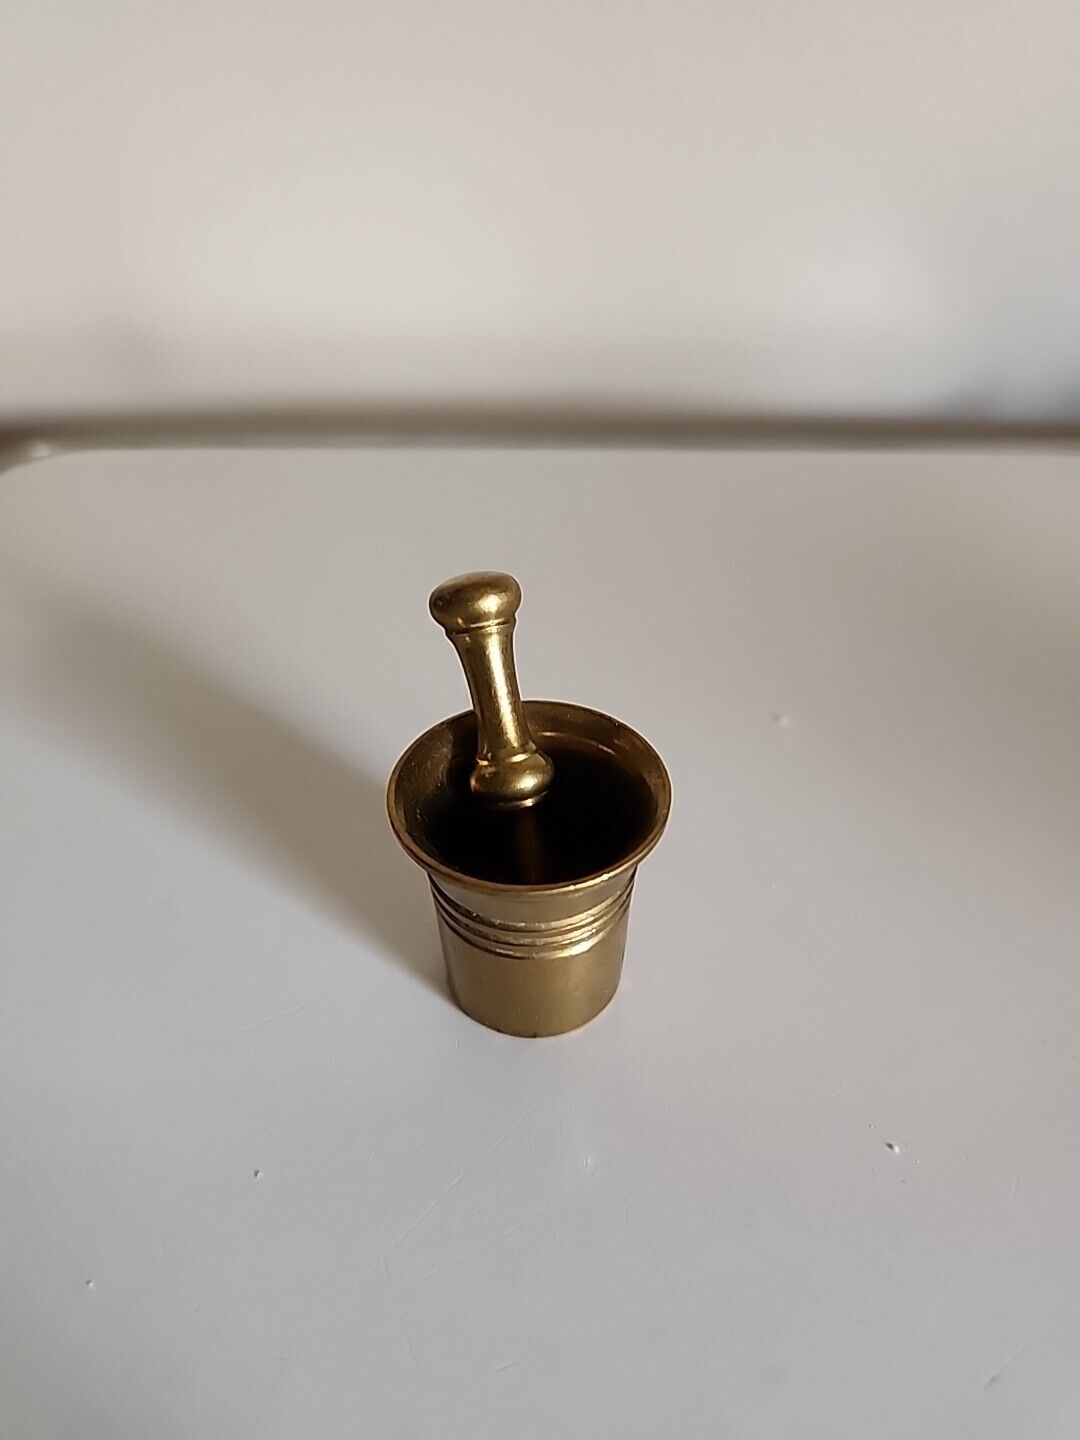 Vintage Solid Brass Apothecary Small Mini Mortar & Pestle Herbs Medicine